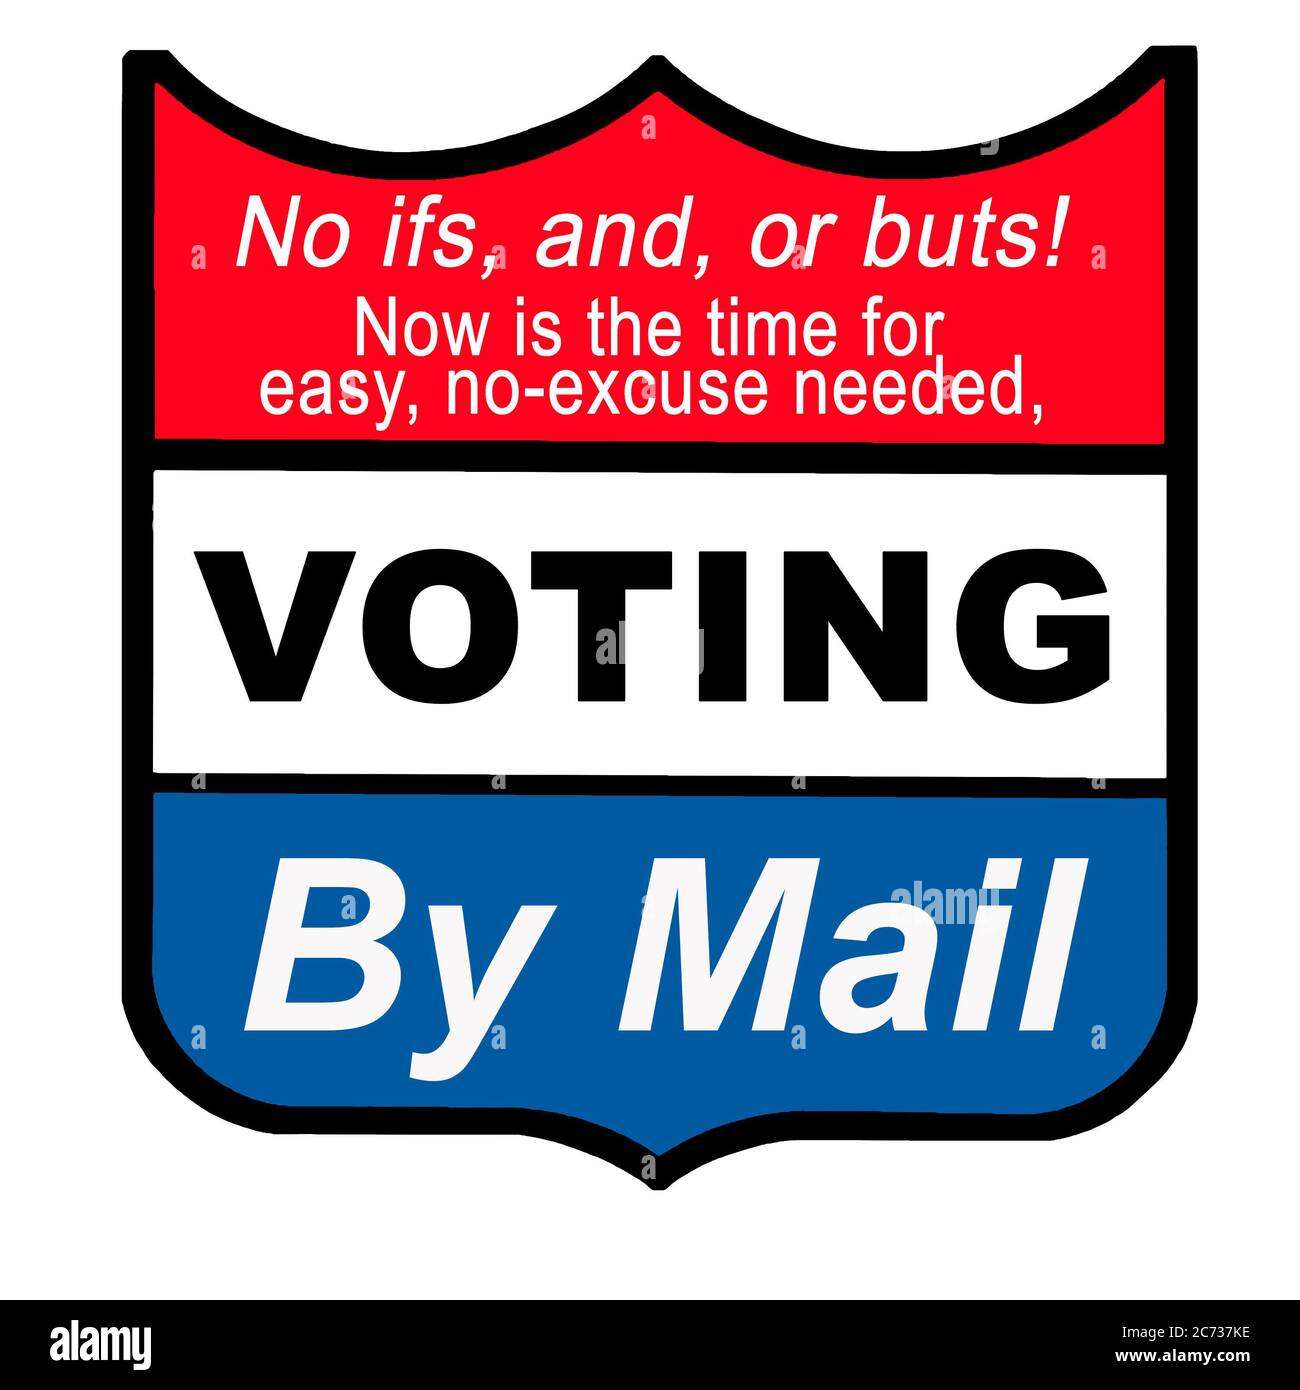 Emblem promotes voting by mail emphasizing that no excuse is needed or should not be needed. Also emphasizes that voting should be easy. Stock Photo